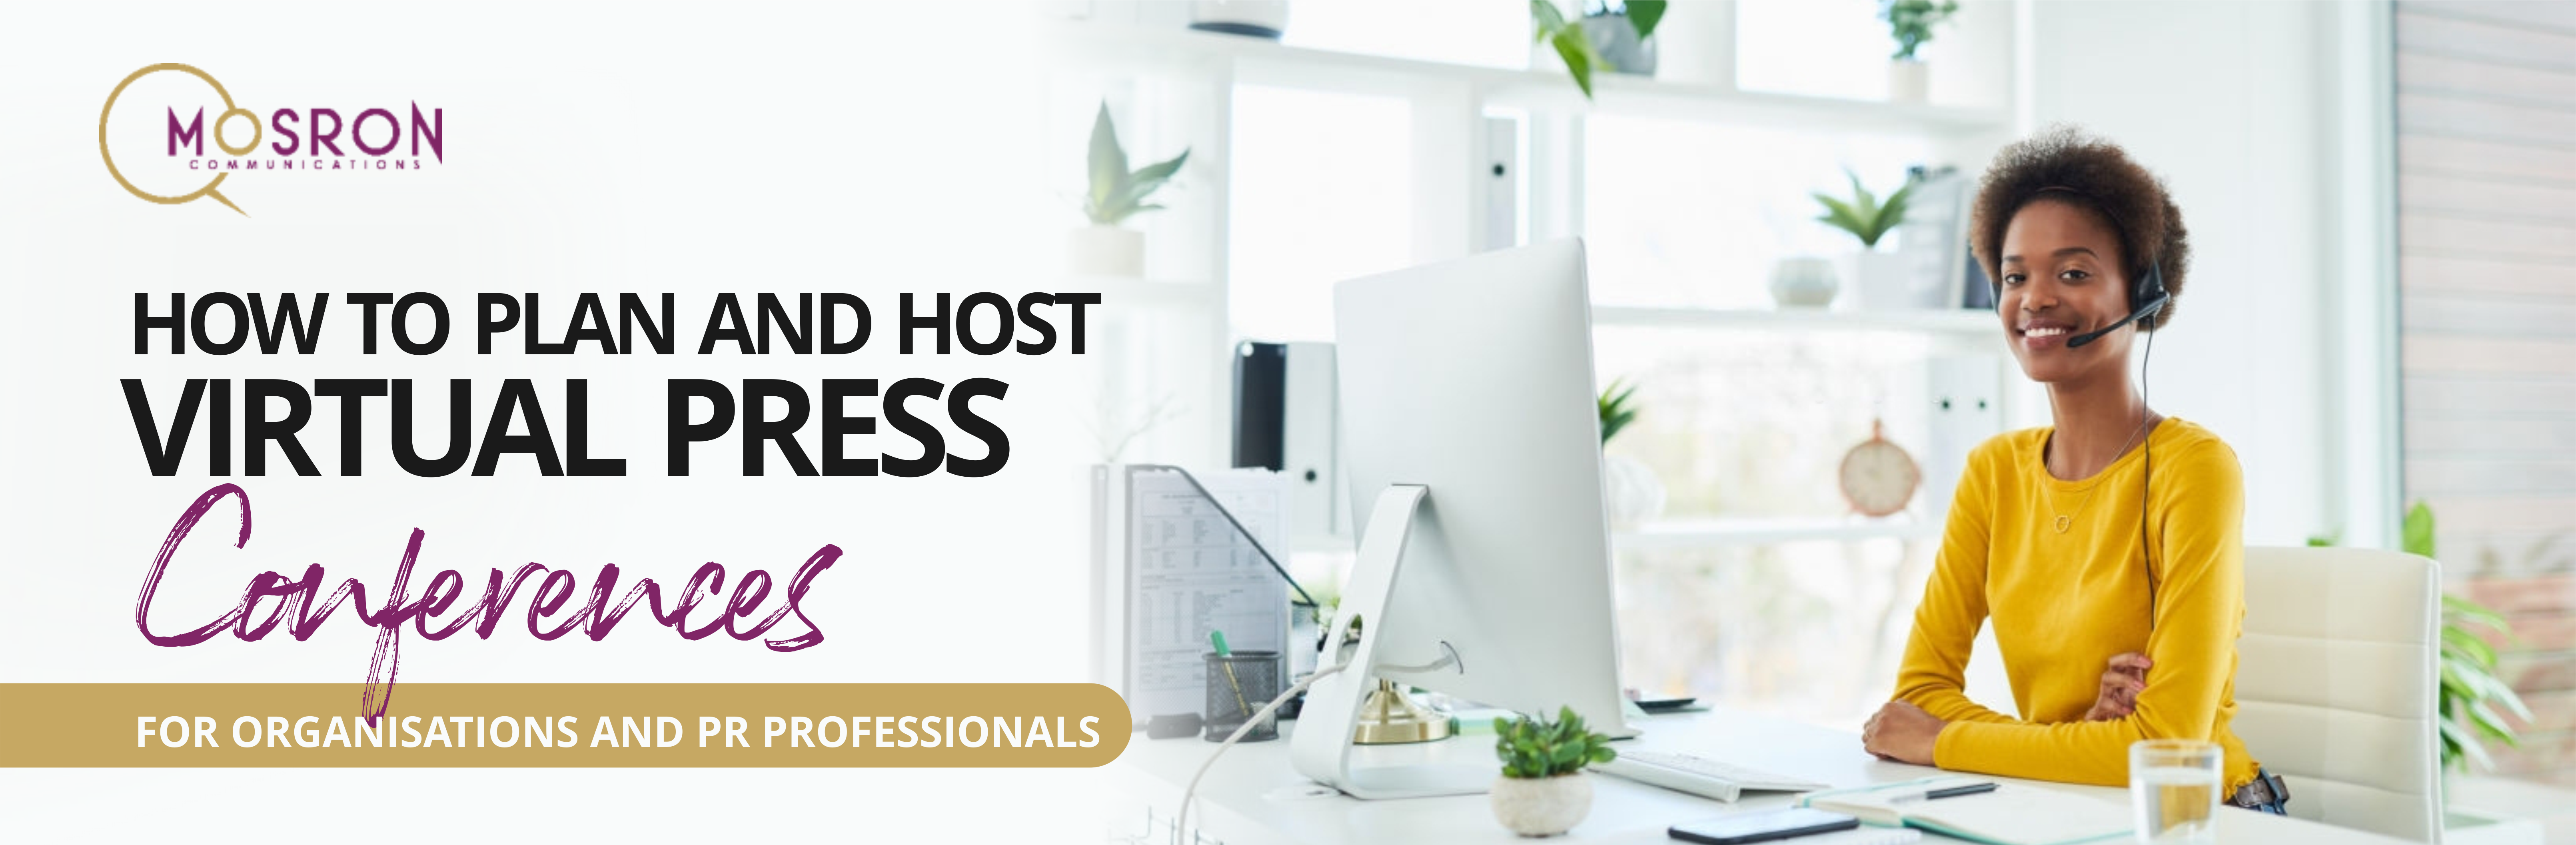 How to Plan and Host Virtual Press Conferences